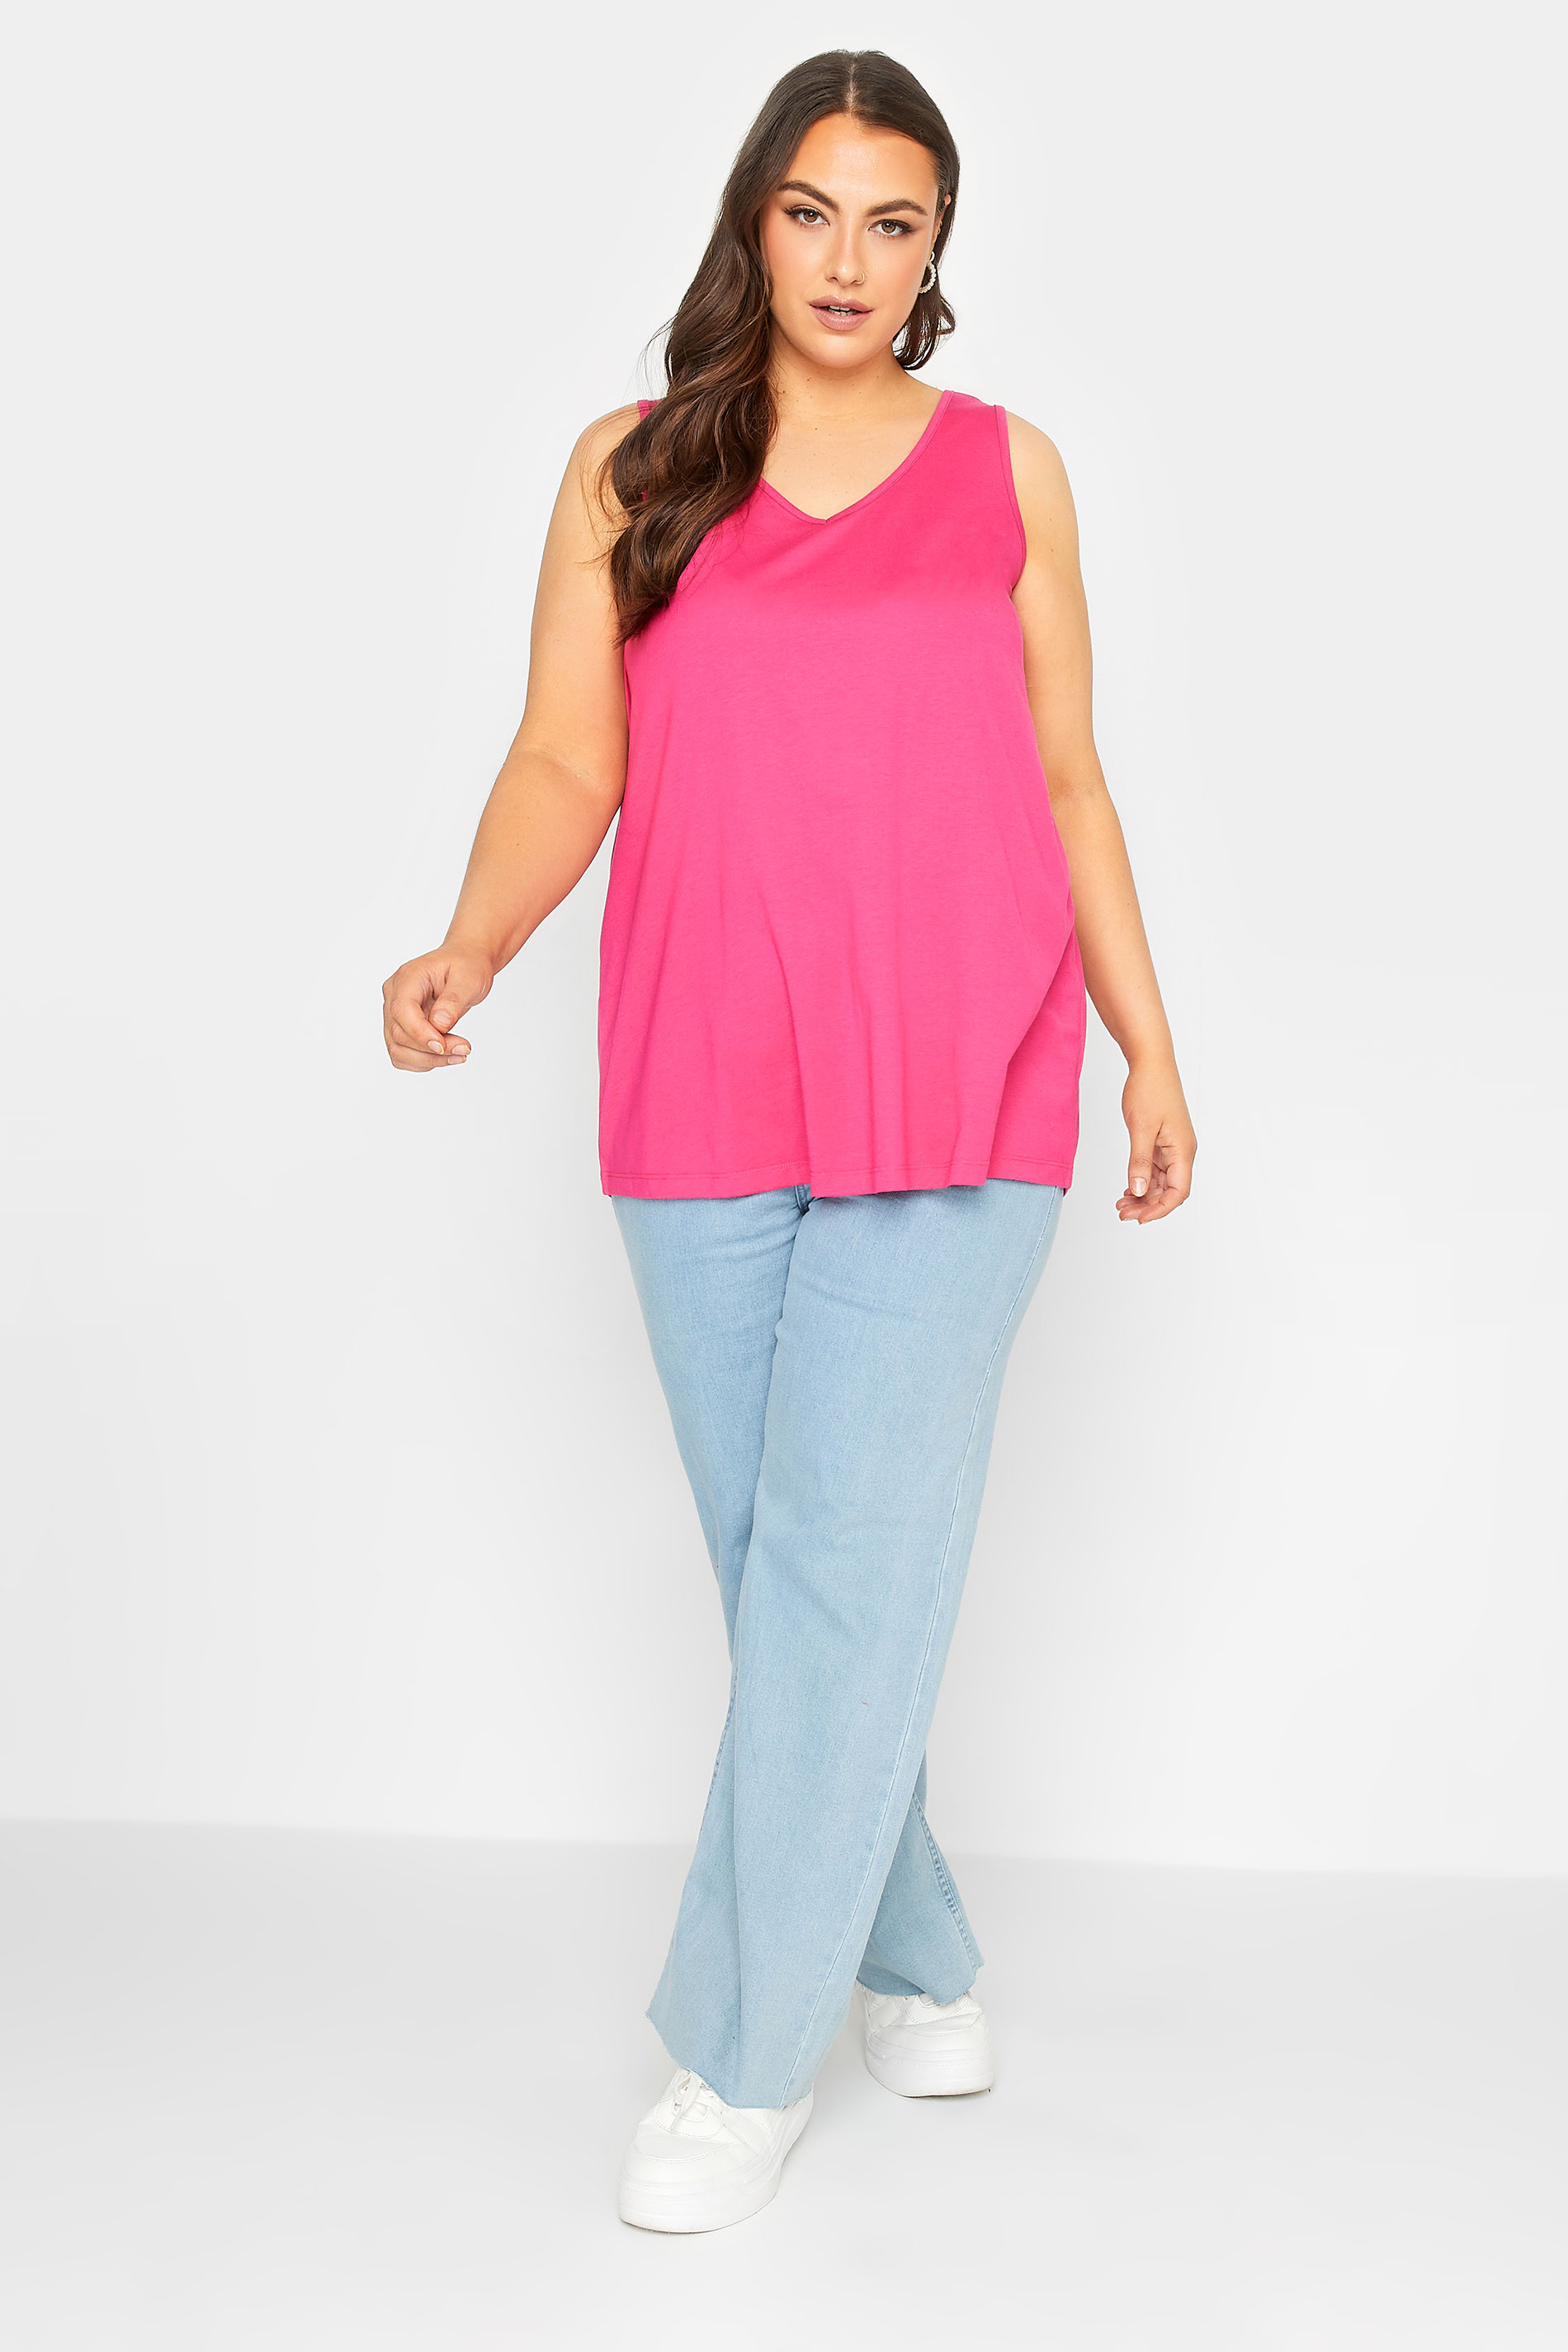 YOURS Plus Size Curve Hot Pink Bar Back Vest Top | Yours Clothing  2